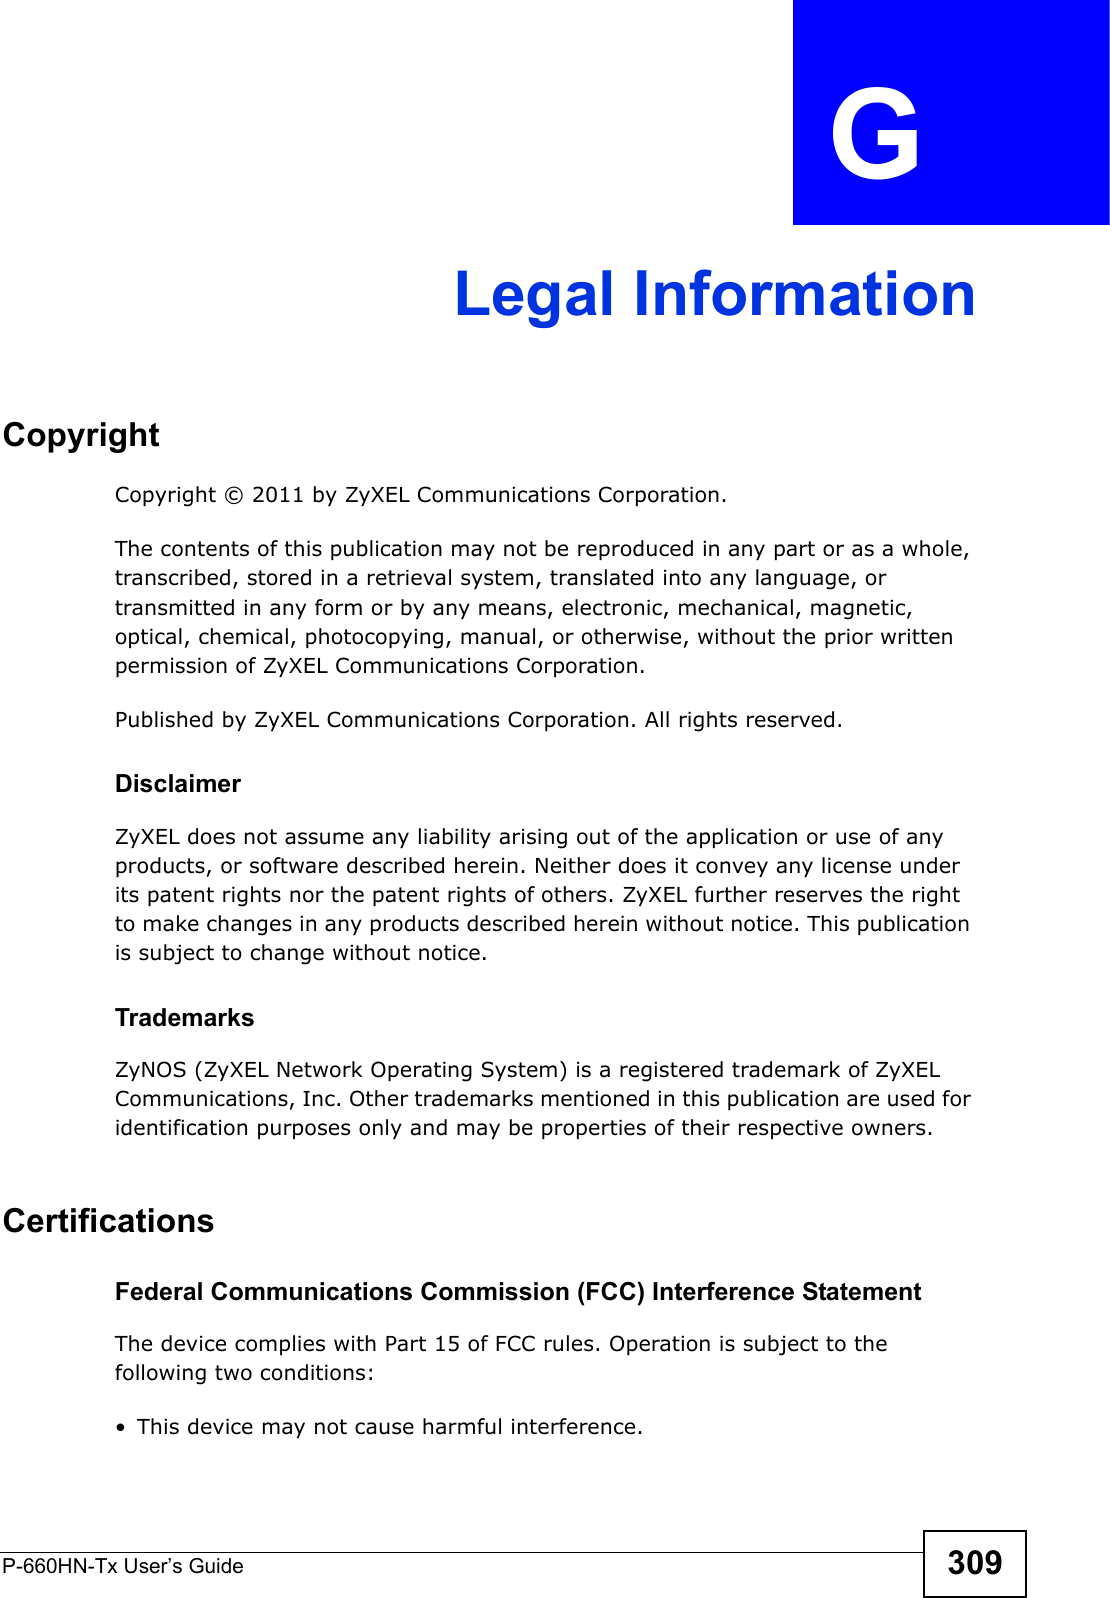 P-660HN-Tx User’s Guide 309APPENDIX  G Legal InformationCopyrightCopyright © 2011 by ZyXEL Communications Corporation.The contents of this publication may not be reproduced in any part or as a whole, transcribed, stored in a retrieval system, translated into any language, or transmitted in any form or by any means, electronic, mechanical, magnetic, optical, chemical, photocopying, manual, or otherwise, without the prior written permission of ZyXEL Communications Corporation.Published by ZyXEL Communications Corporation. All rights reserved.DisclaimerZyXEL does not assume any liability arising out of the application or use of any products, or software described herein. Neither does it convey any license under its patent rights nor the patent rights of others. ZyXEL further reserves the right to make changes in any products described herein without notice. This publication is subject to change without notice.TrademarksZyNOS (ZyXEL Network Operating System) is a registered trademark of ZyXEL Communications, Inc. Other trademarks mentioned in this publication are used for identification purposes only and may be properties of their respective owners.Certifications Federal Communications Commission (FCC) Interference StatementThe device complies with Part 15 of FCC rules. Operation is subject to the following two conditions:• This device may not cause harmful interference.